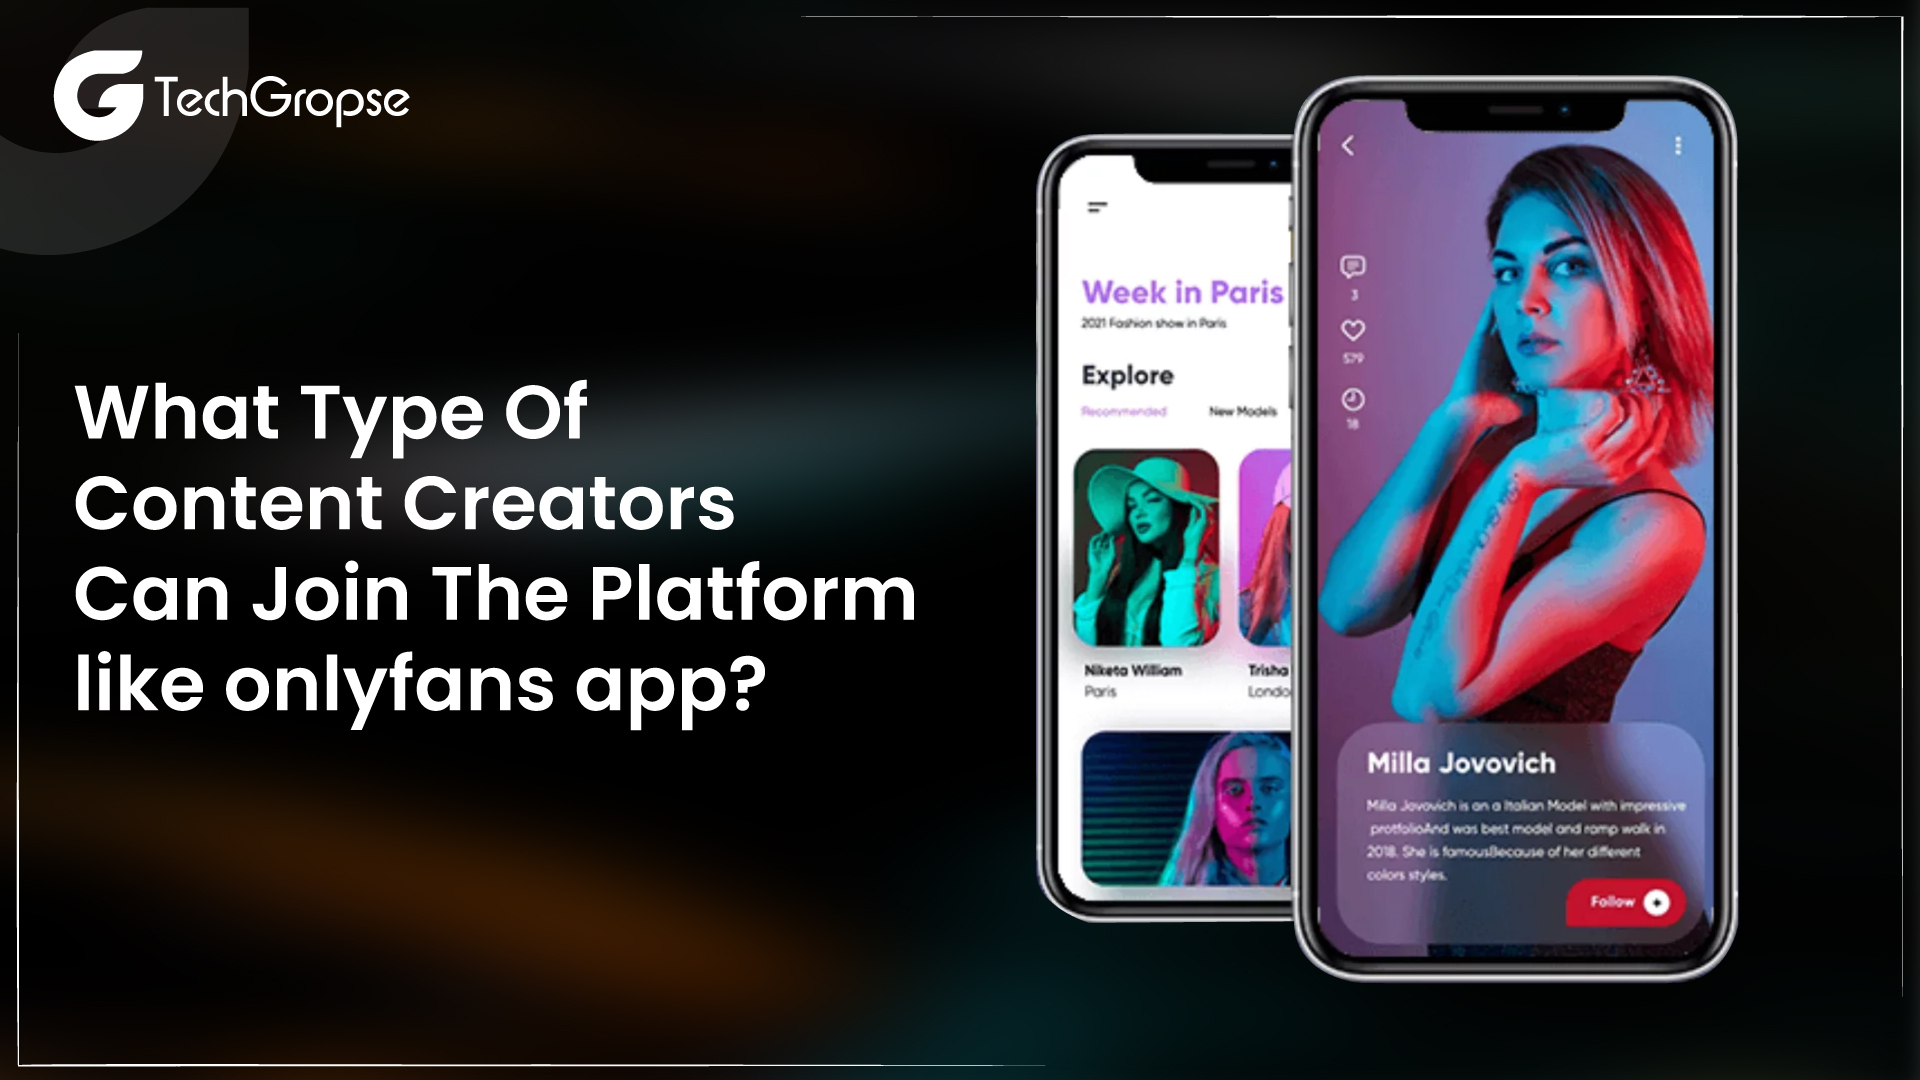 What Type Of Content Creators Can Join The Platform Like Onlyfans App?